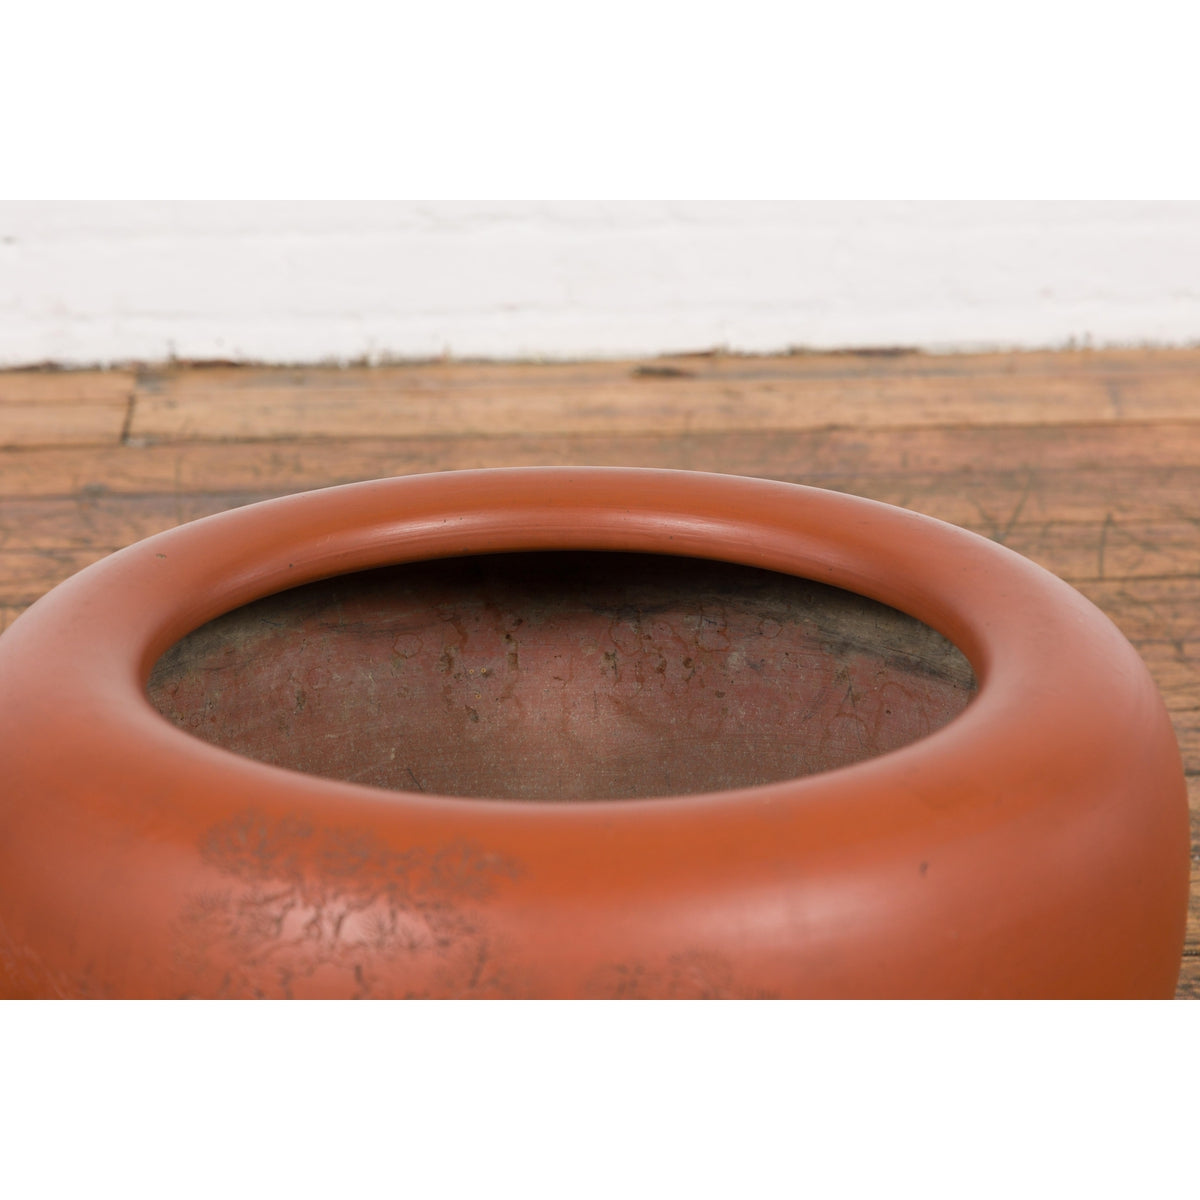 Orange Circular Antique Planter with Etched Design-YN7819-4. Asian & Chinese Furniture, Art, Antiques, Vintage Home Décor for sale at FEA Home